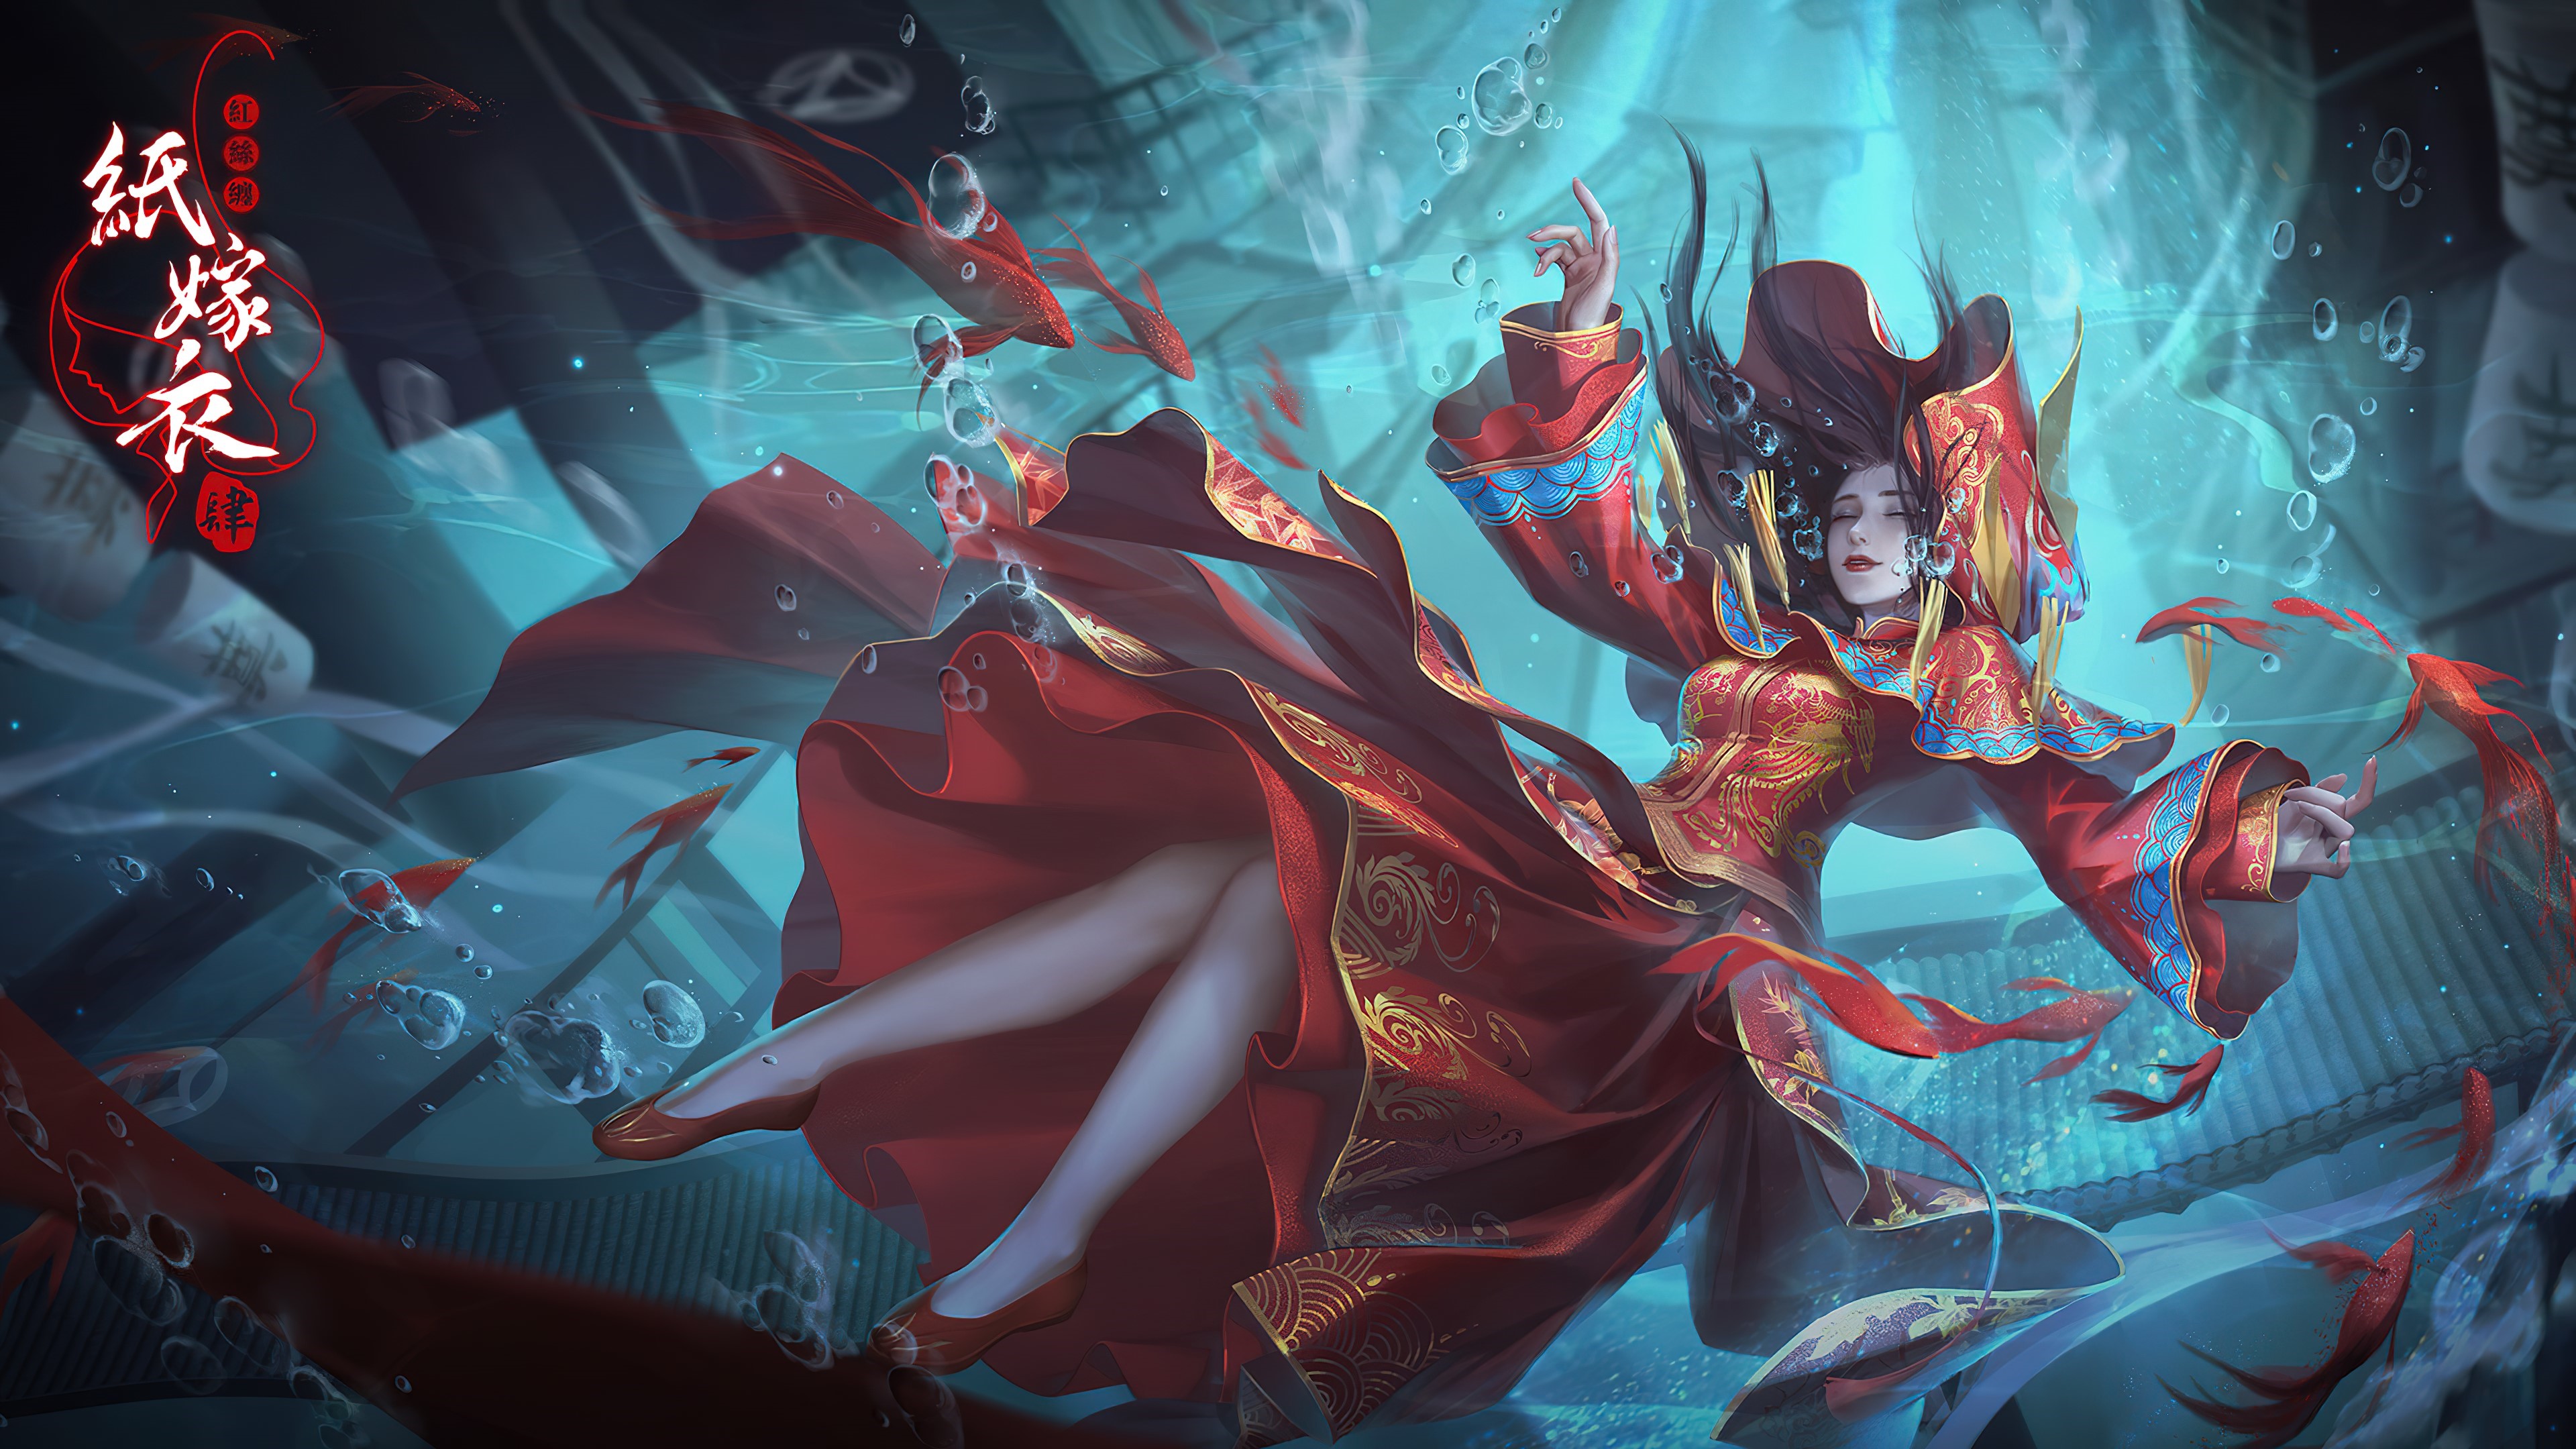 Paperbride Cui Wanying Chinese ZhiJiaYi Fantasy Girl Fish Underwater In Water Bubbles Fantasy Art 3840x2160